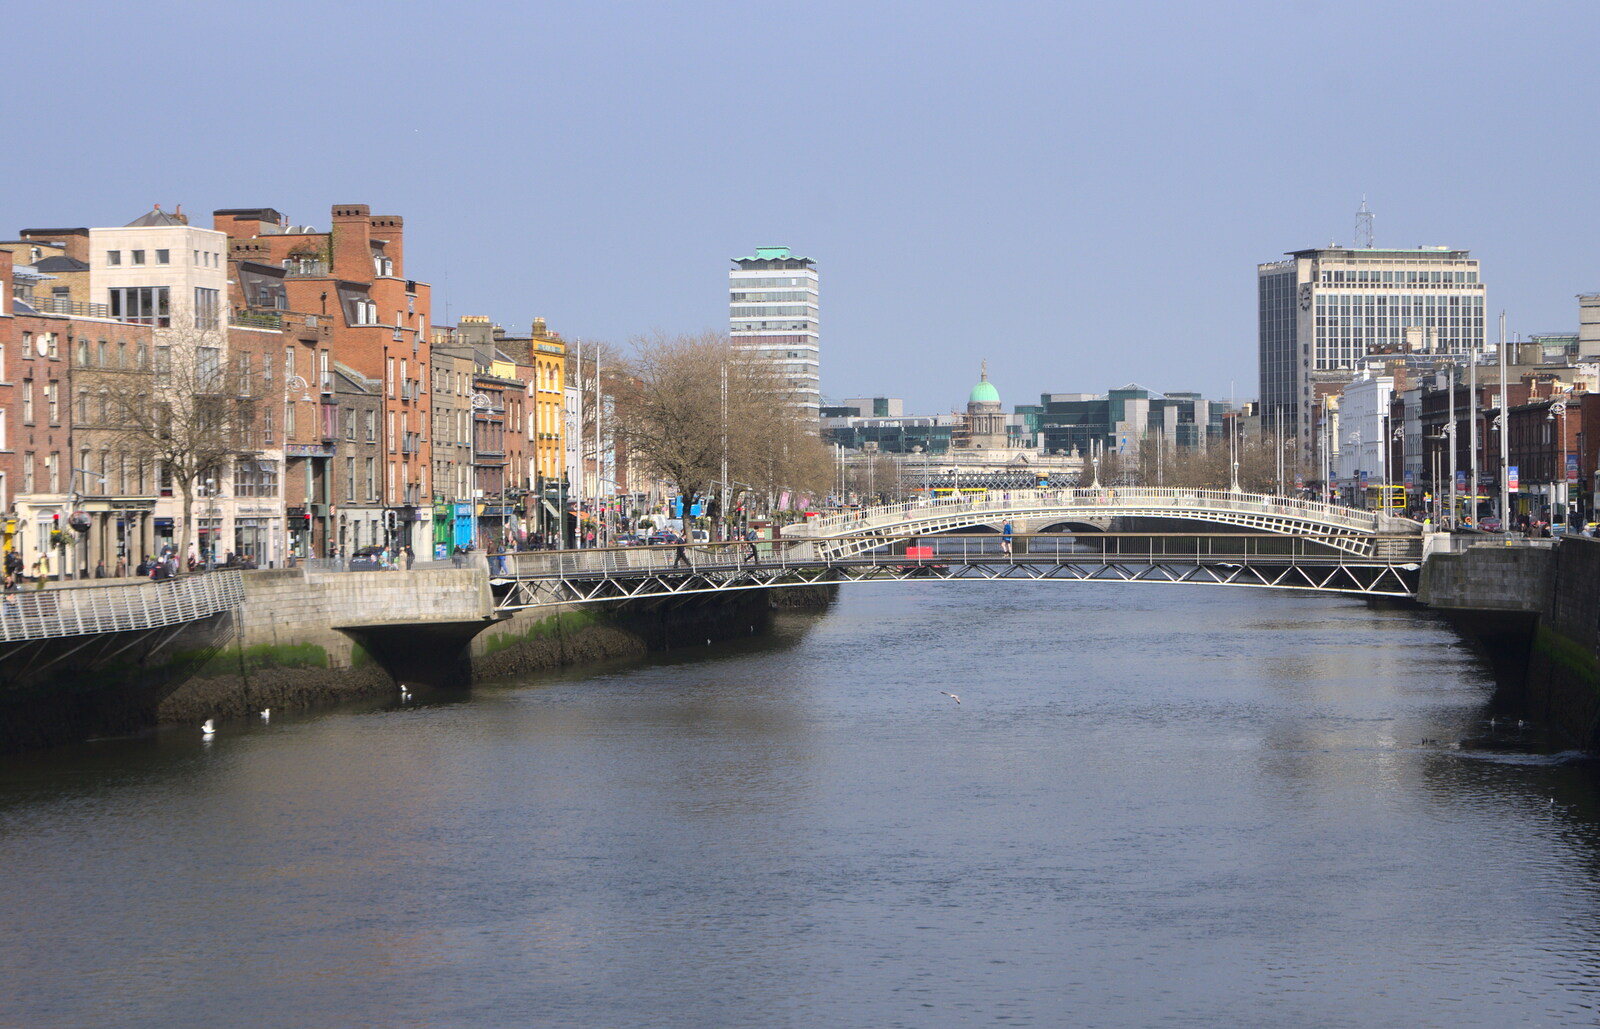 The River Liffey from Temple Bar and Dun Laoghaire, Dublin, Ireland - 16th April 2015